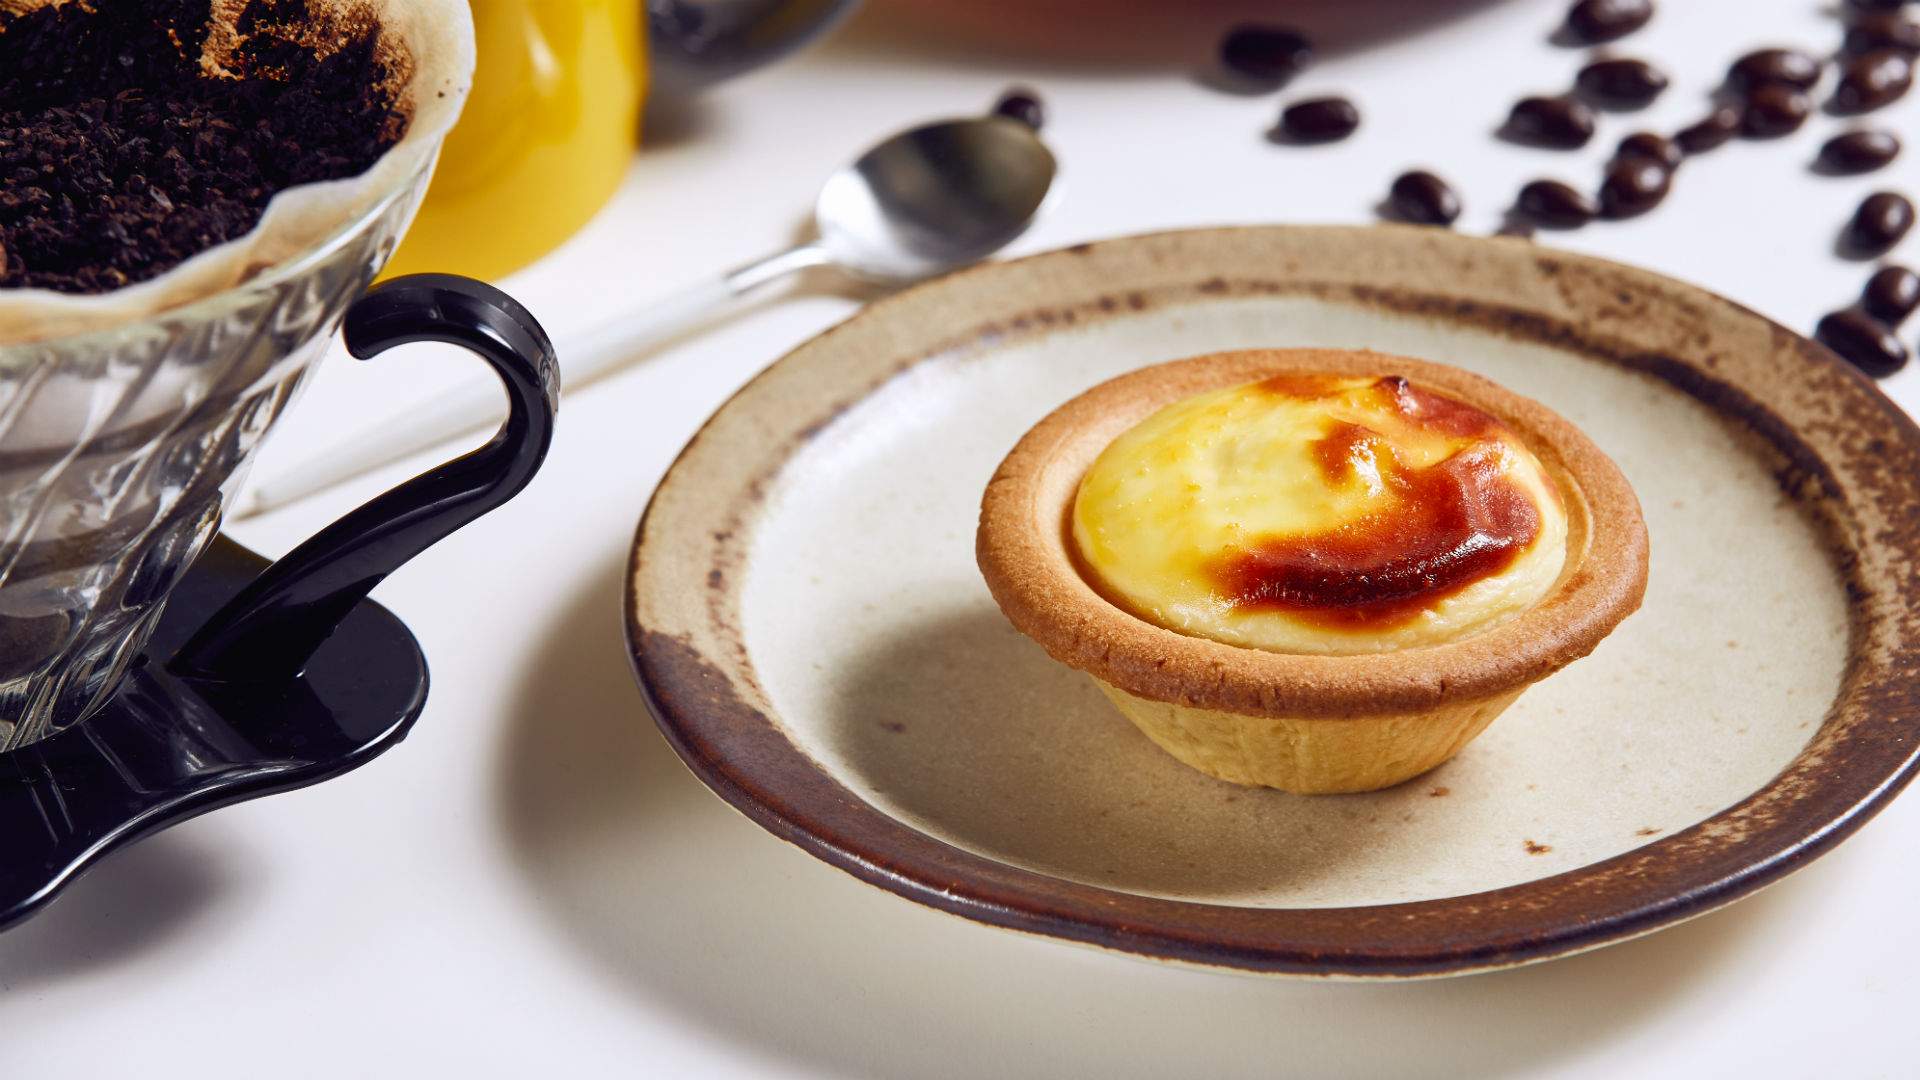 Malaysia's Insanely Popular Baked Three-Cheese Tarts Arrive In Brisbane Next Week